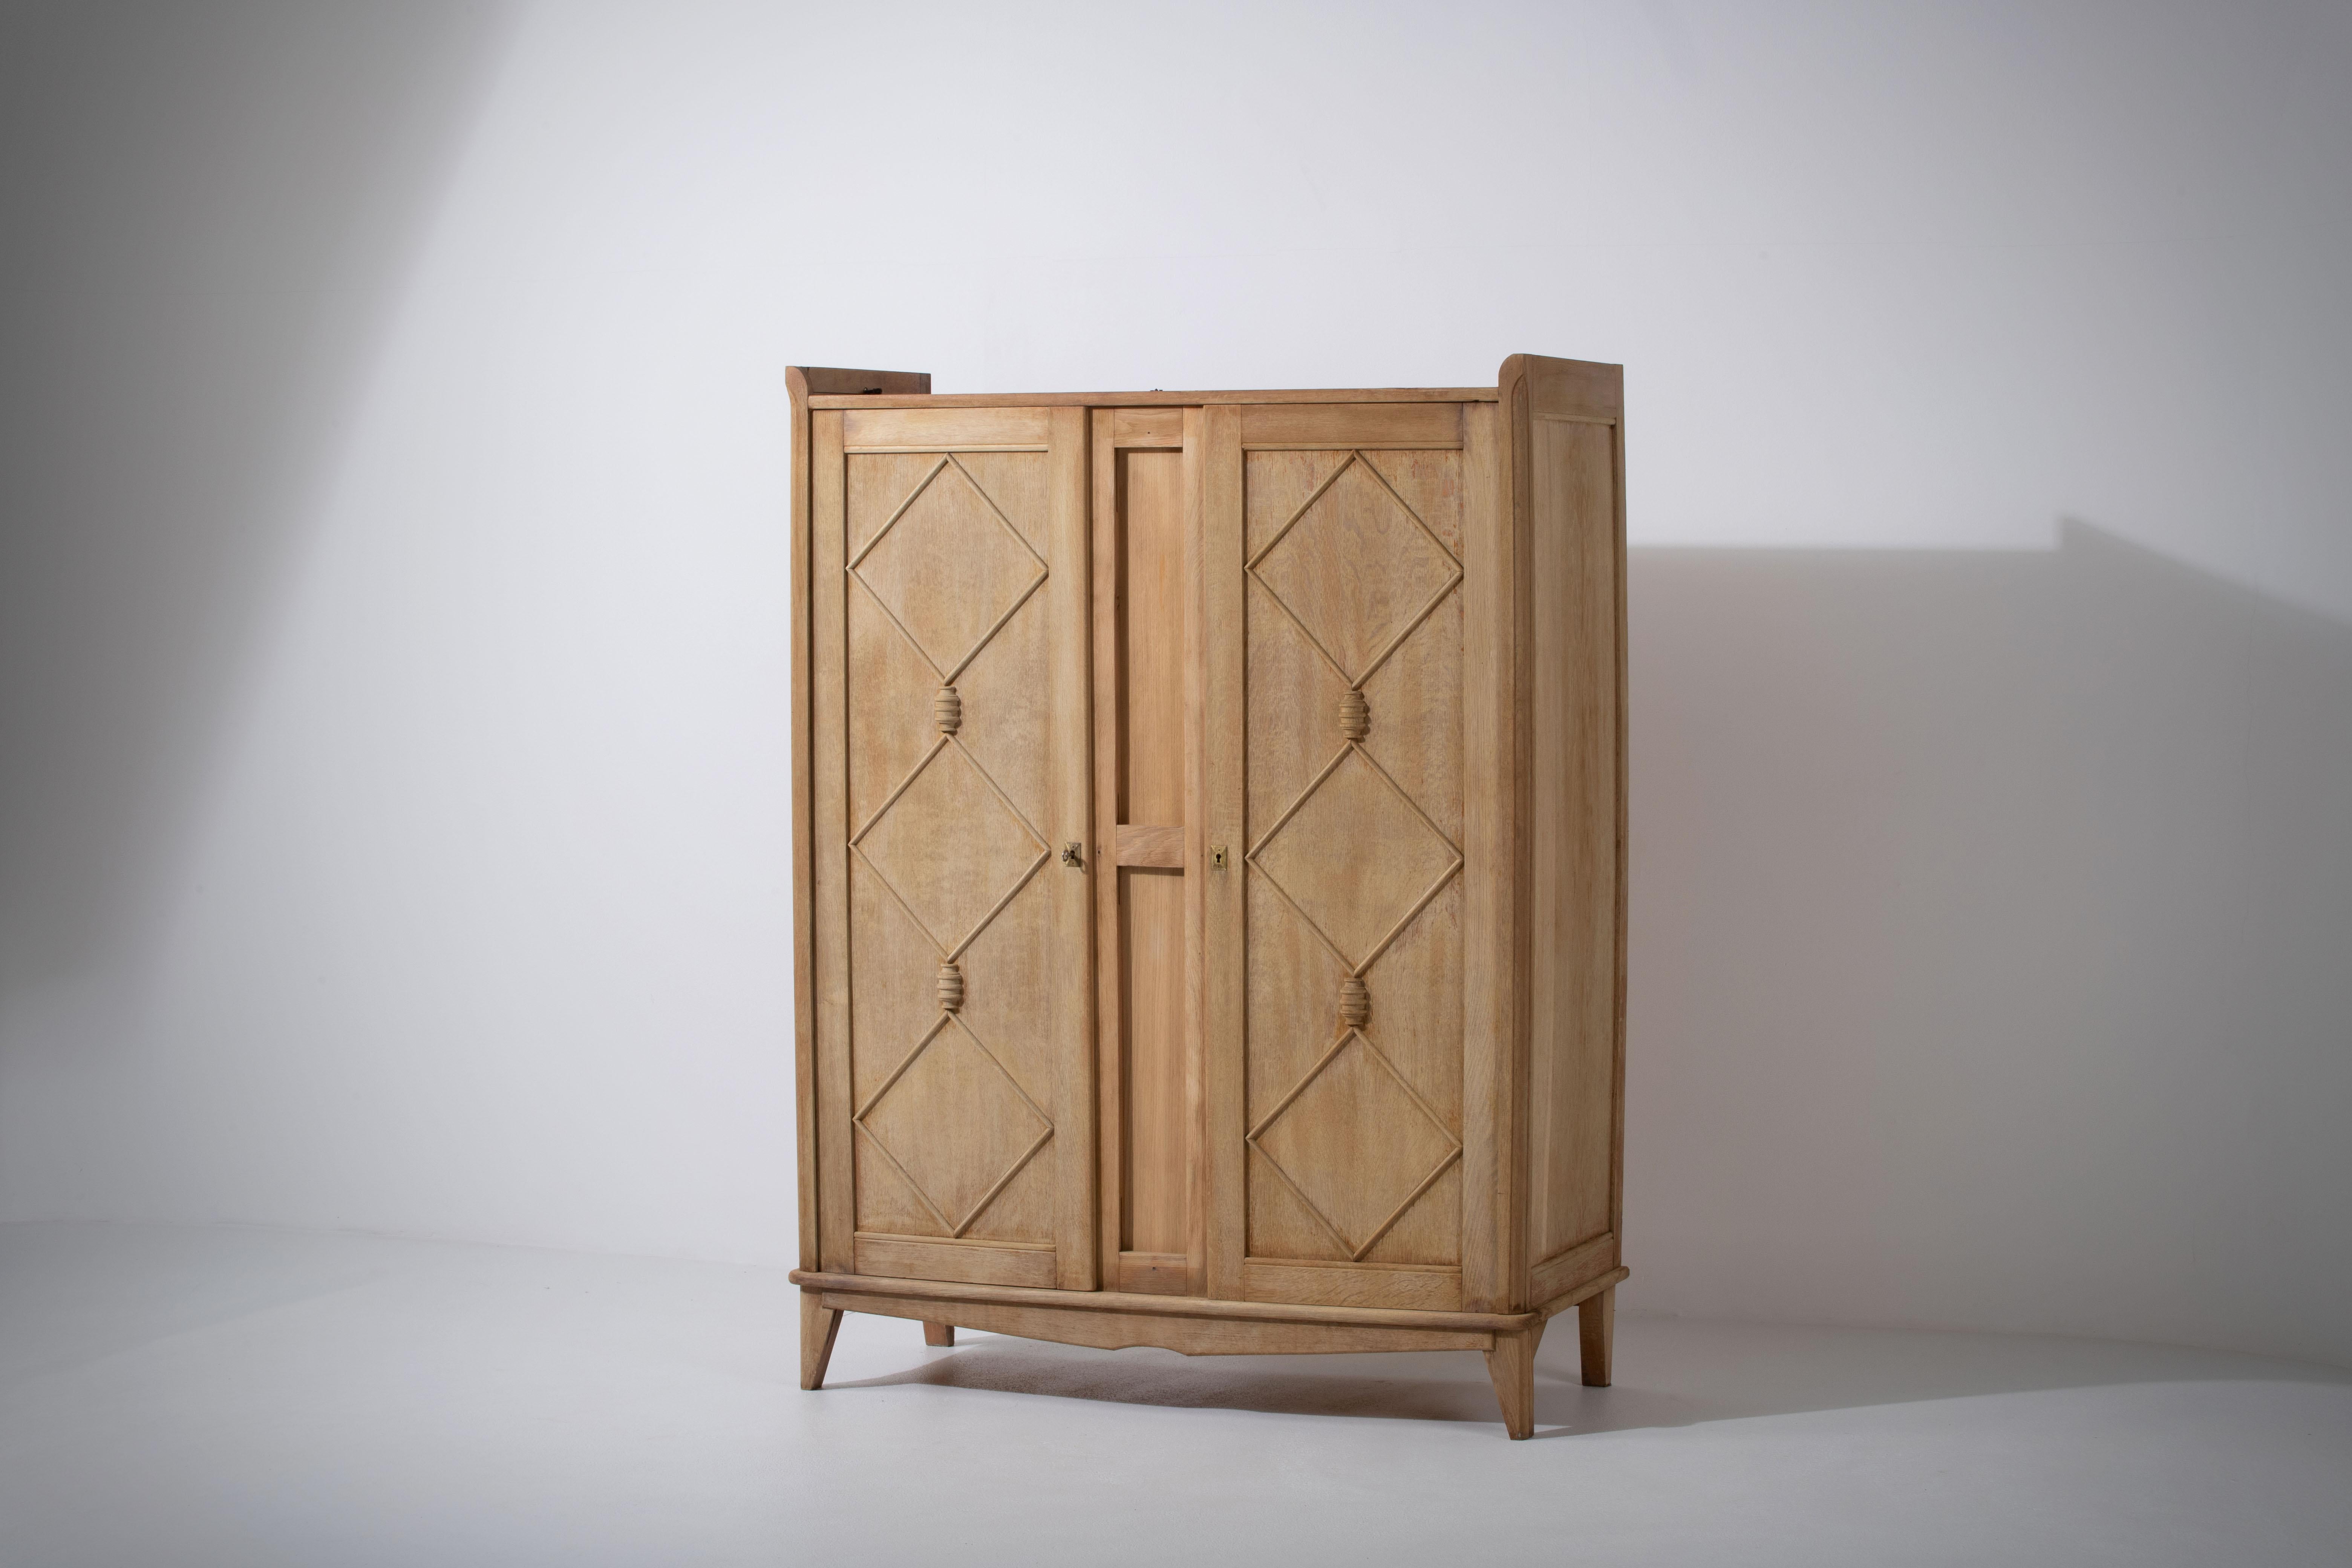 Immerse yourself in the essence of midcentury French design with this striking vintage oak wardrobe, crafted in the 1960s. The piece pays homage to the iconic Jean Royère, drawing parallels with his signature style in the form of its double doors,